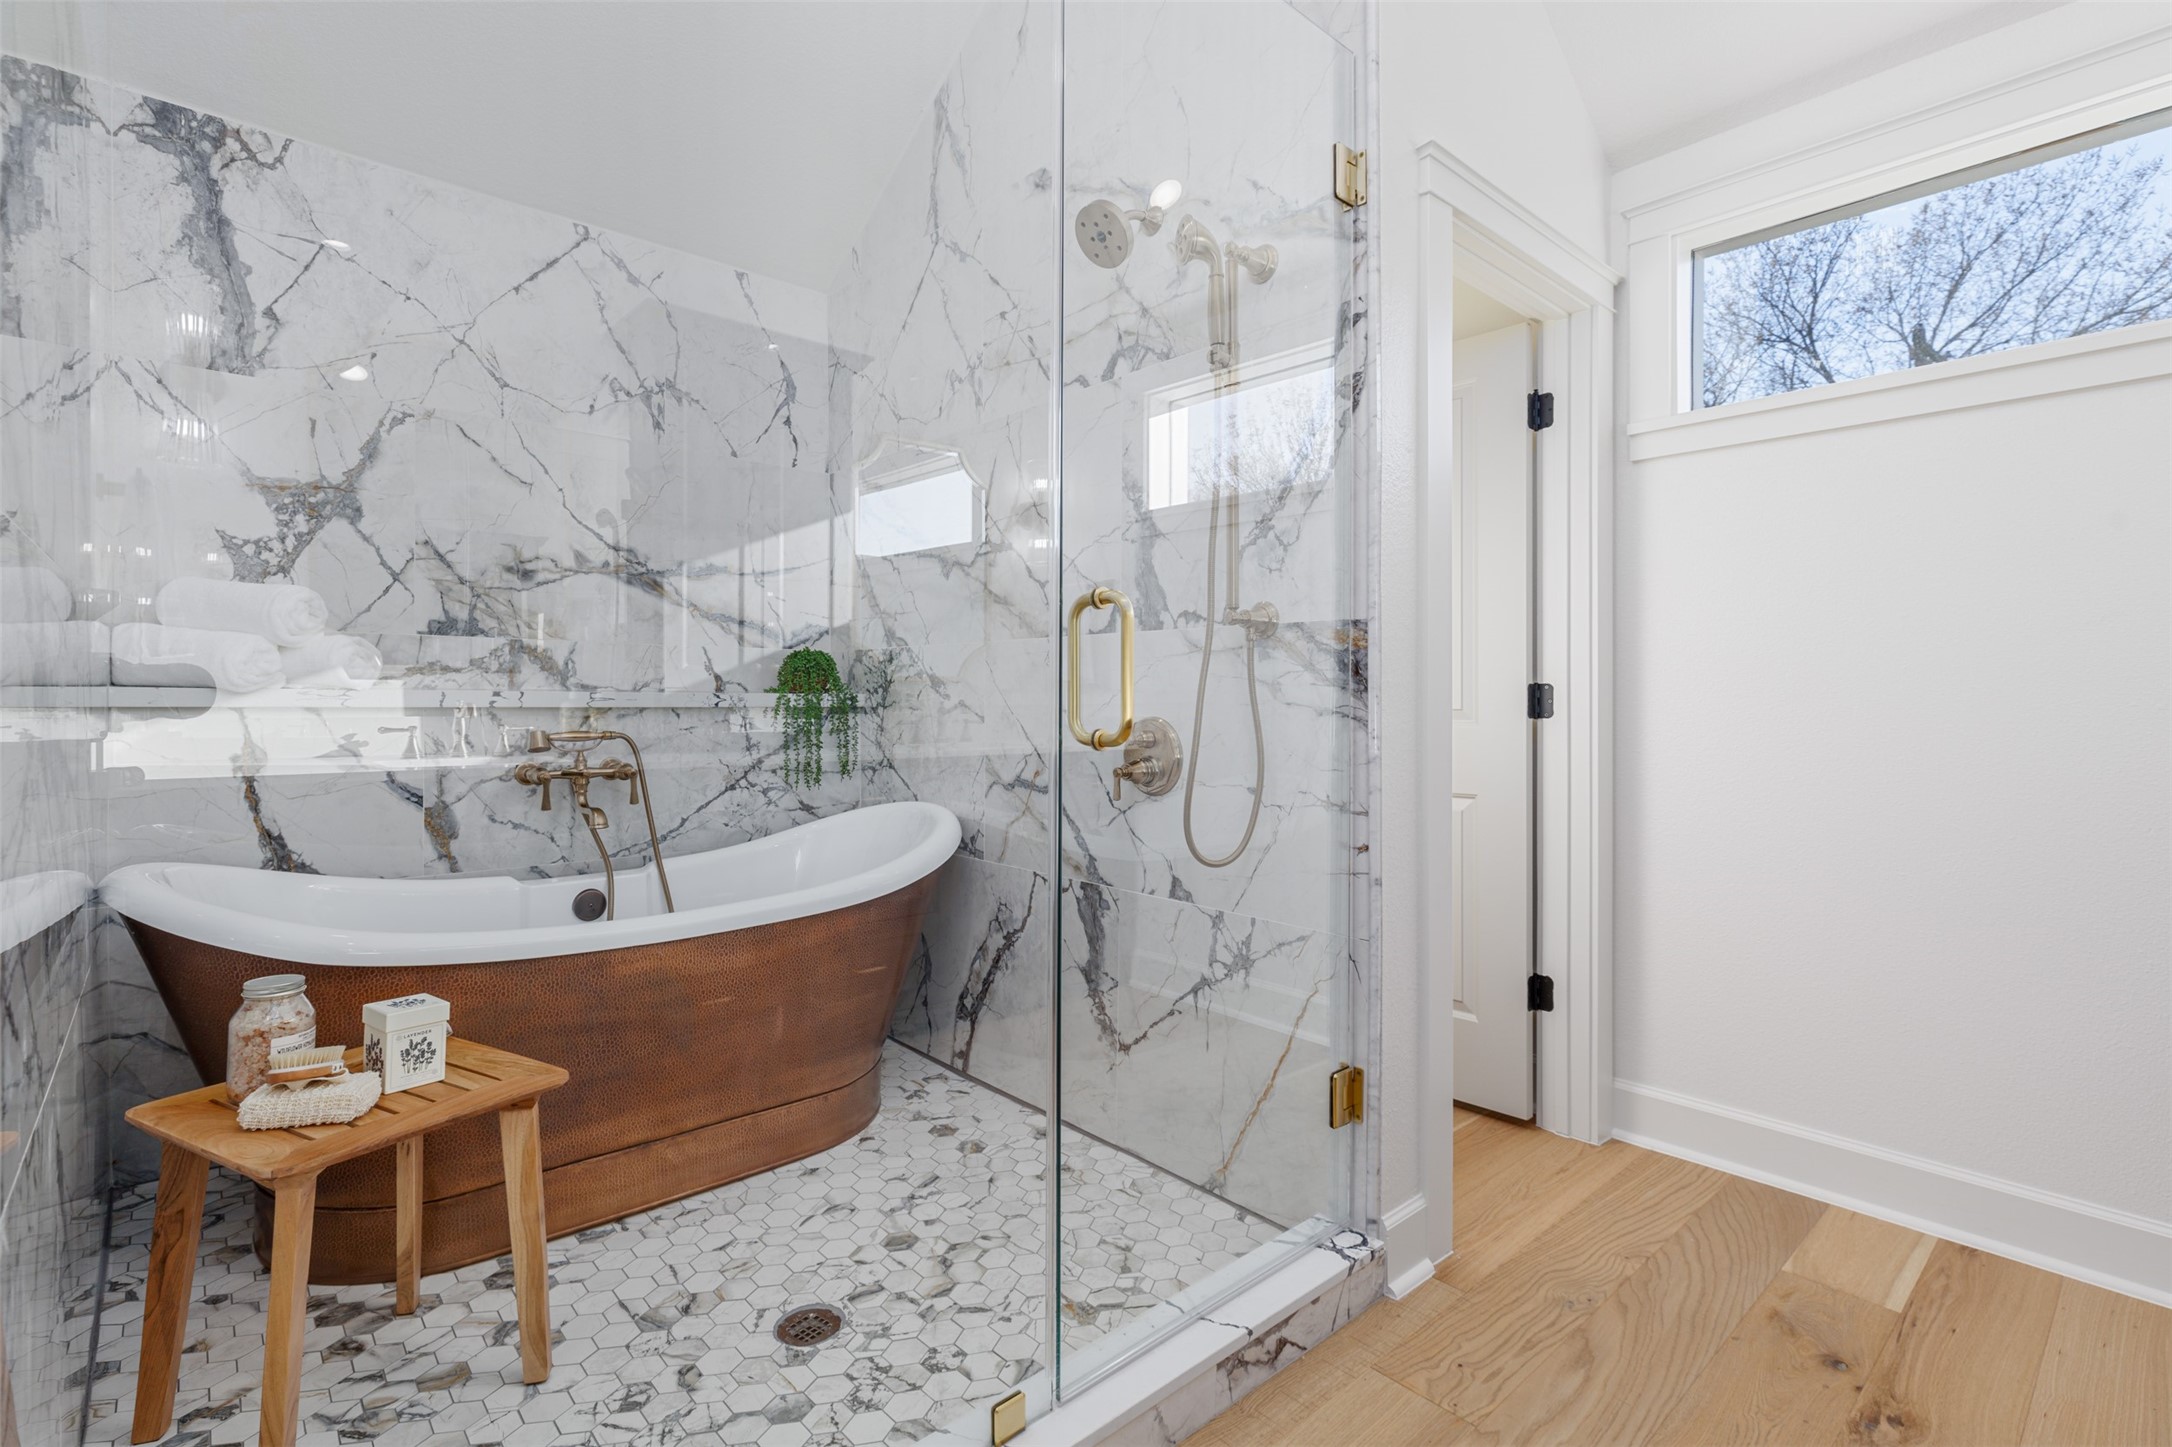 This beautiful fully geometrically tiled shower/tub combo with modern sliding glass doors, champagne brass hardware, double sinks and quartz surface areas and statement color cabinets provide a most elegant ensuite to the guest room and also cleverly serves as the downstairs bathroom for the house by separate access.